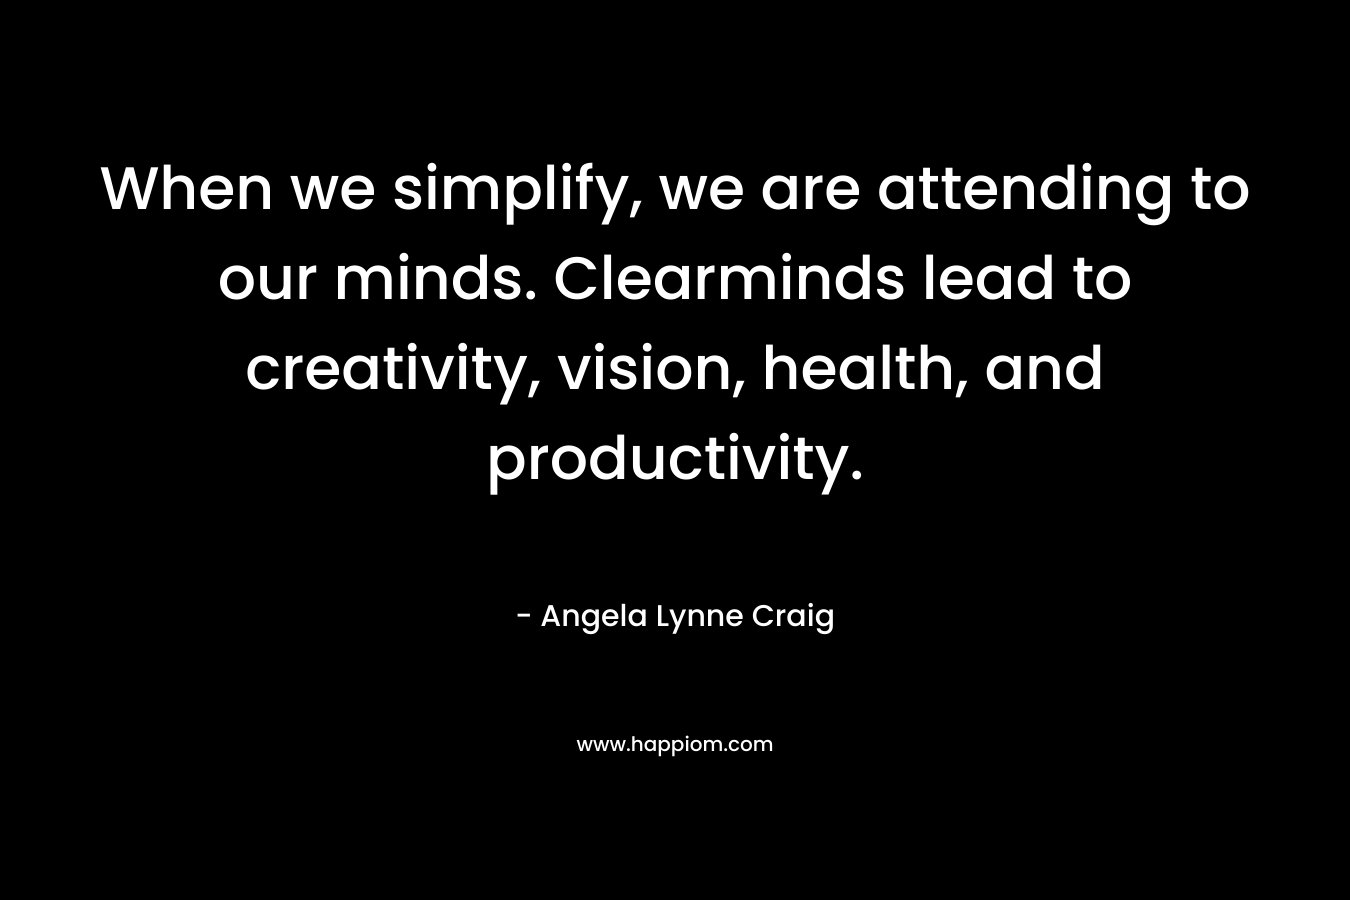 When we simplify, we are attending to our minds. Clearminds lead to creativity, vision, health, and productivity. – Angela Lynne Craig